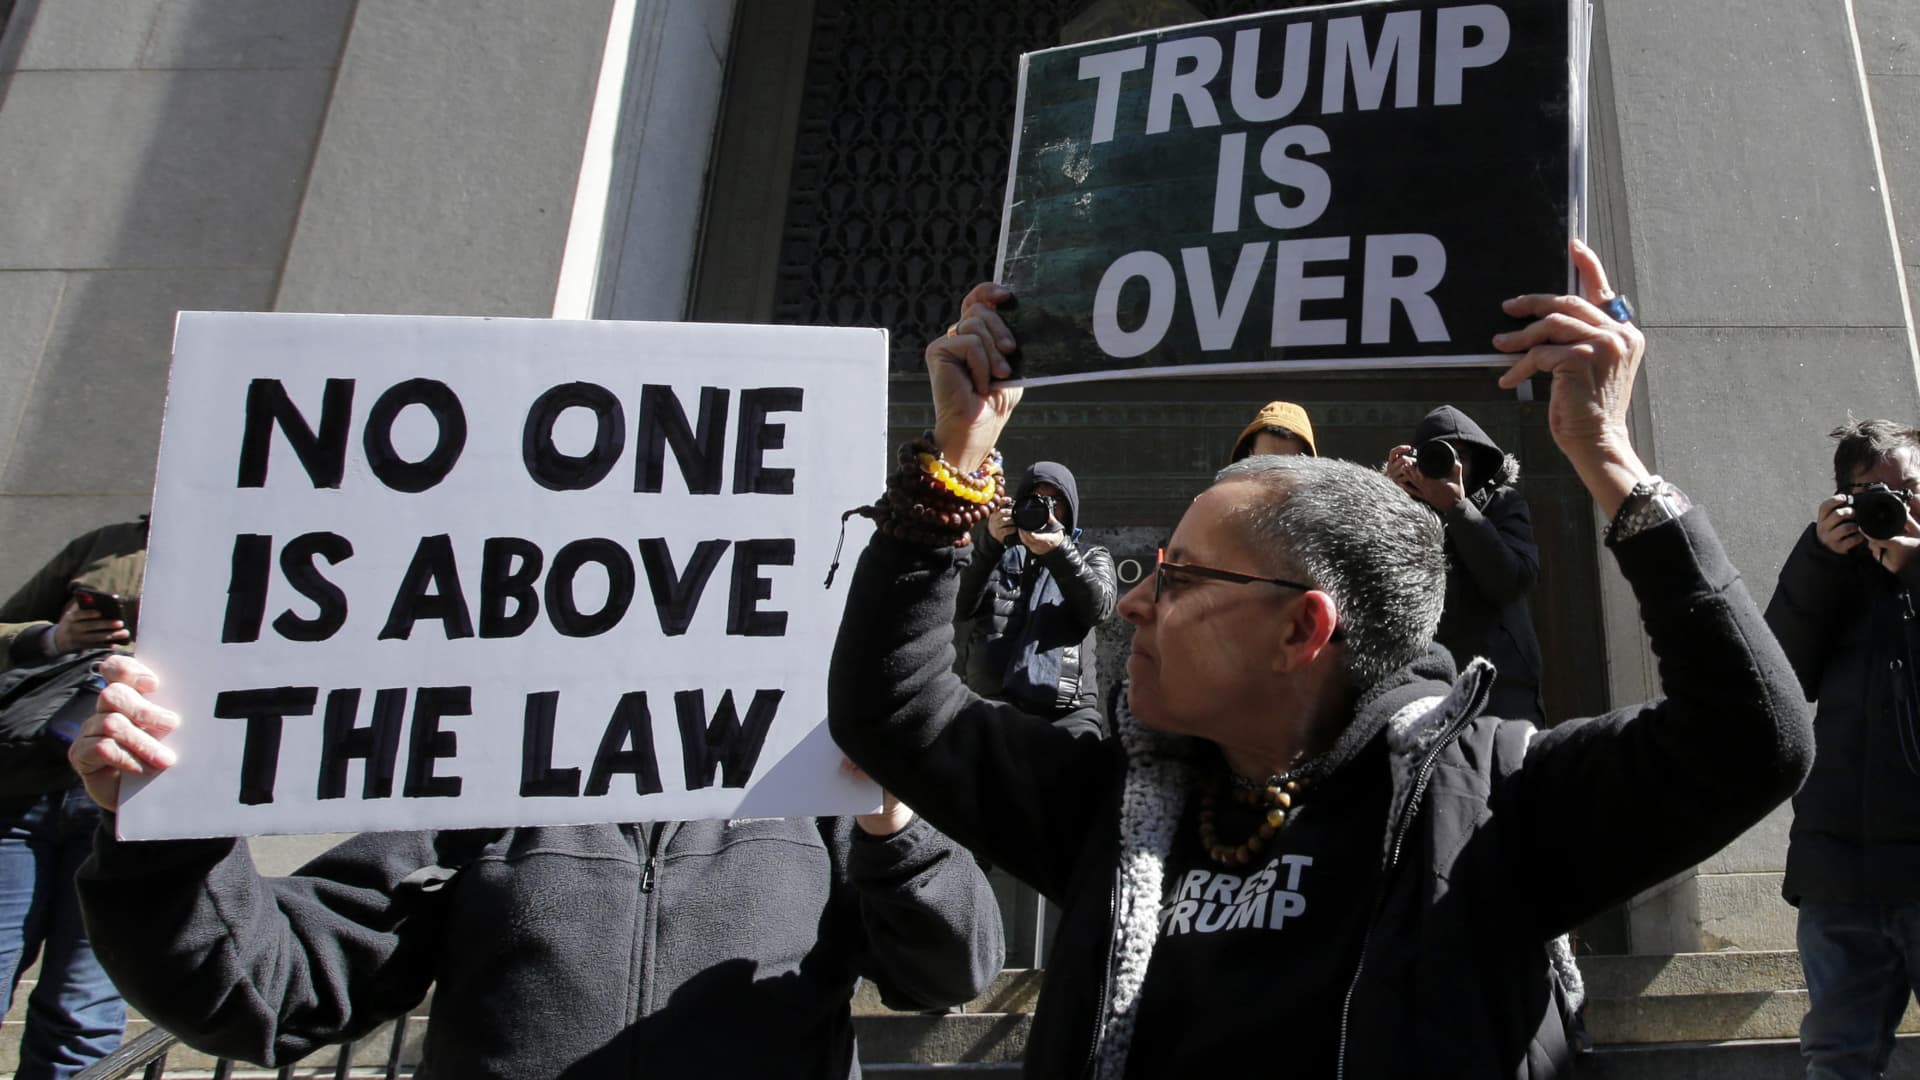 Anti-Trump demonstrators hold placards outside the Manhattan District Attorney's office in New York City on March 20, 2023.